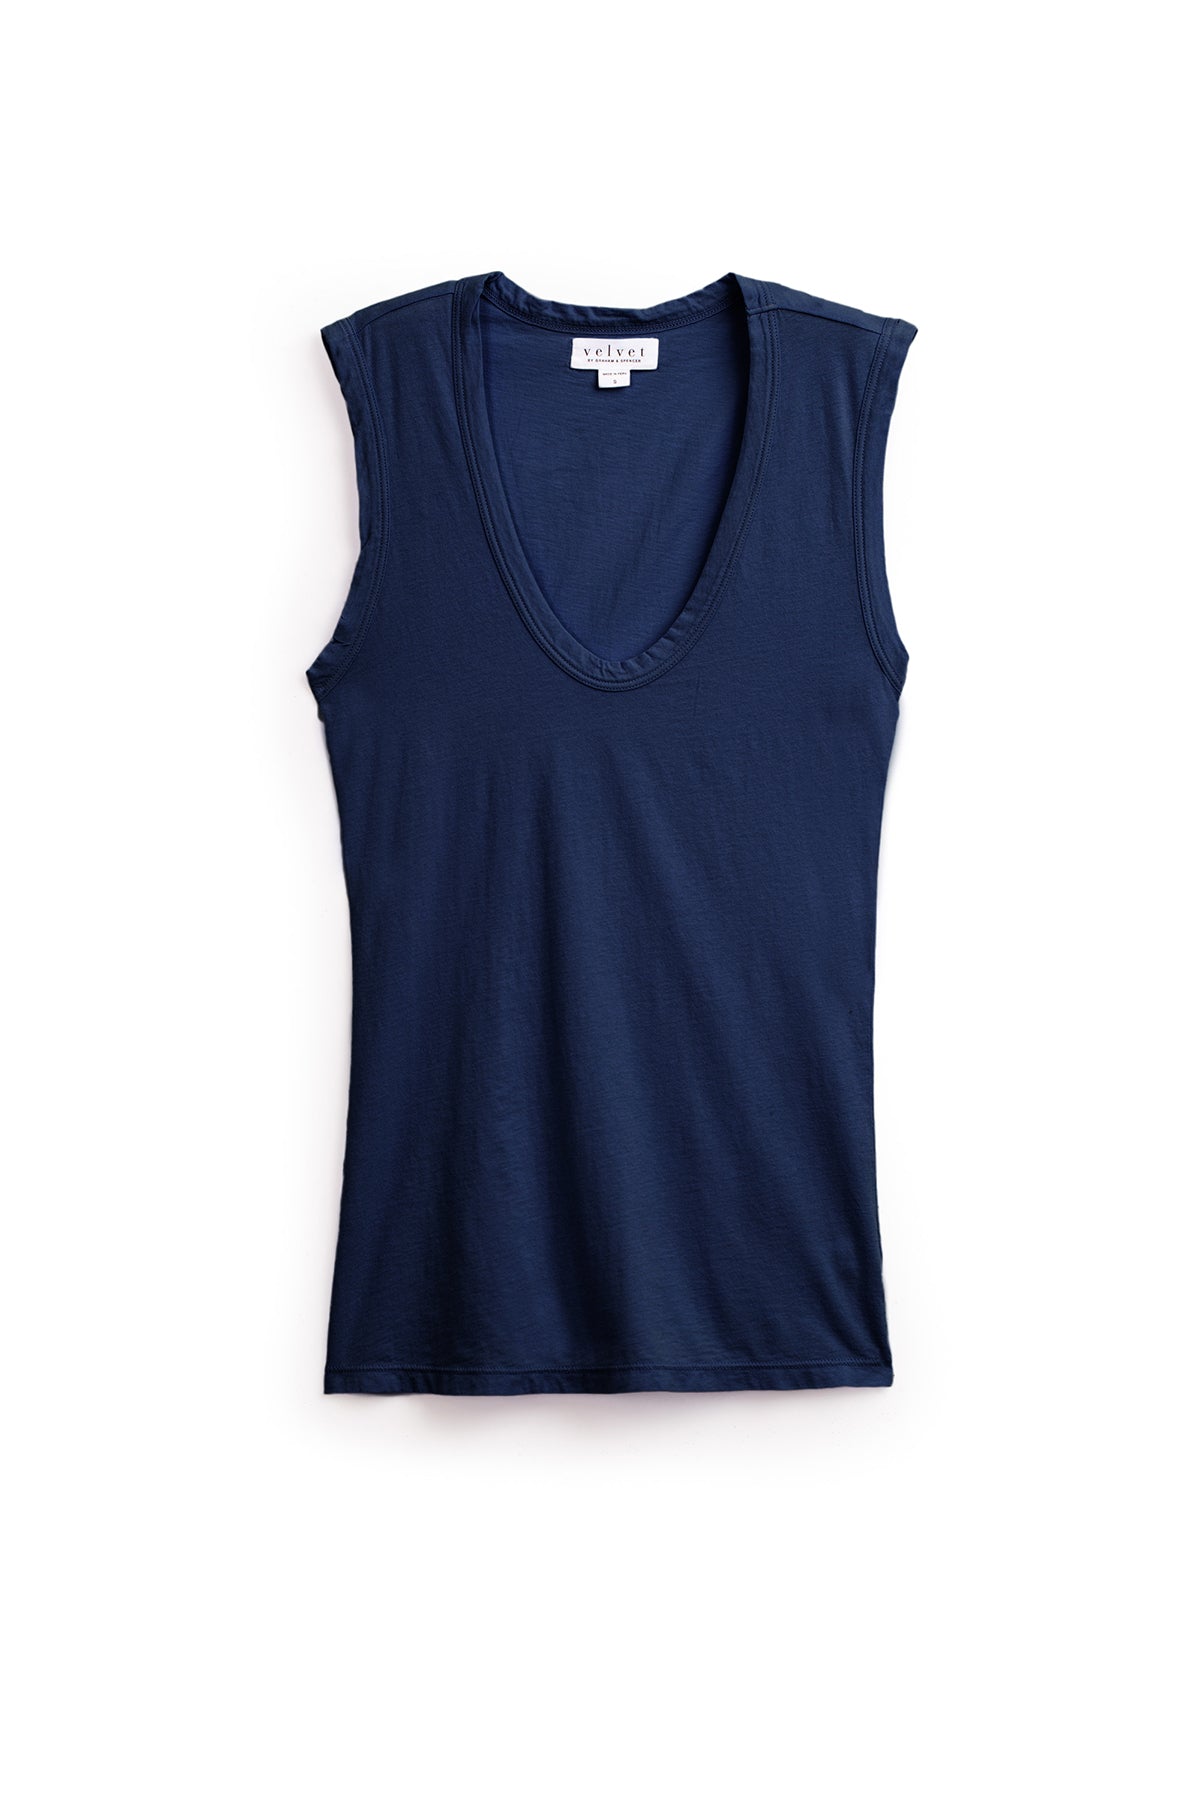 A navy blue sleeveless V-neck laid-back tank, the ESTINA TANK TOP by Velvet by Graham & Spencer, displayed on a white background.-35413240053953